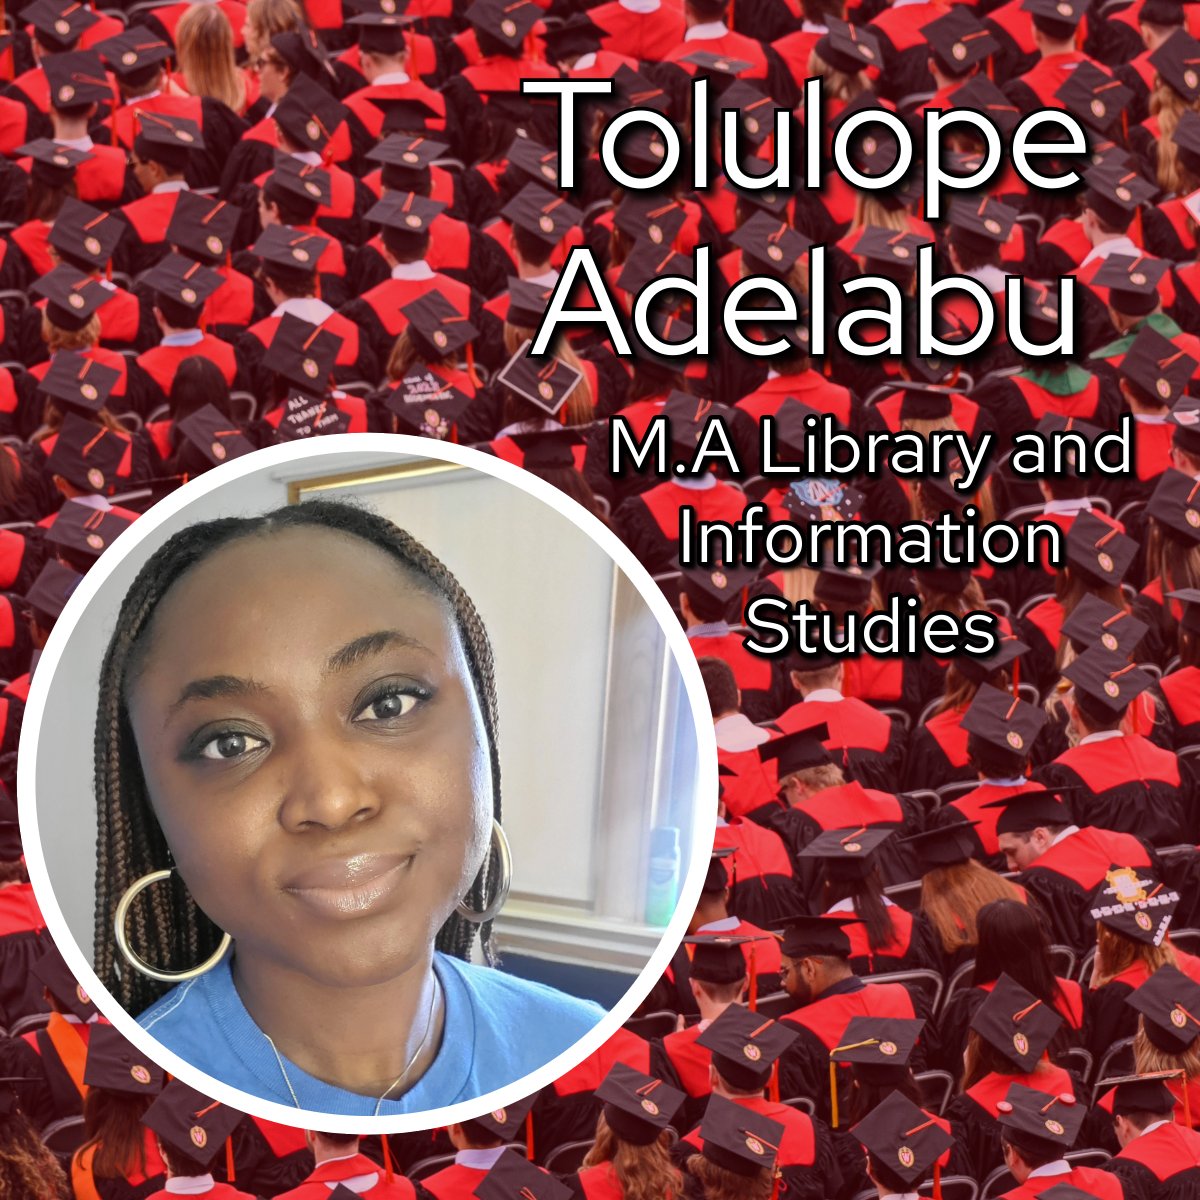 Meet Tolulope Adelabu, a trailblazing 2024 graduate from Nigeria. After earning her master's from @UWMadiSchool she is headed to earn her Ph.D. from @ACS_uwmadison, while continuing to curate and disseminate culturally appropriate information about Africa. cdis.wisc.edu/commencement-2…